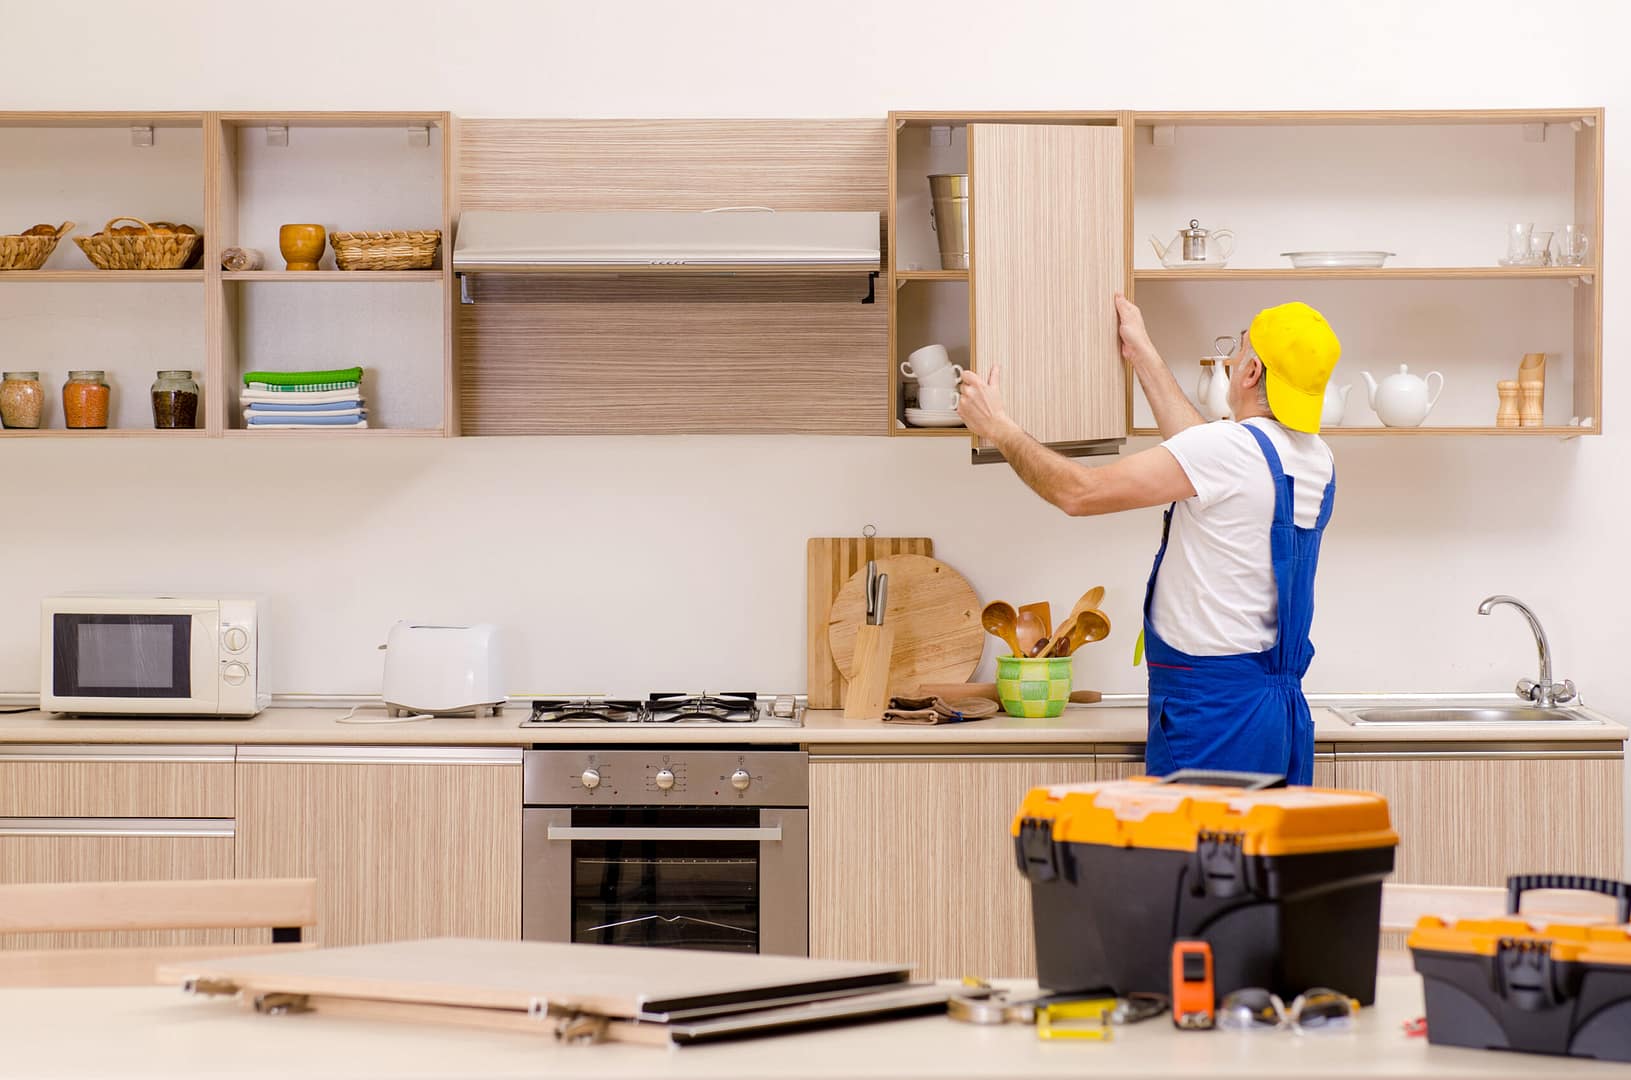 As a handyman perfects kitchen installations, local splash fine-tunes your seo strategy to capture more potential clients.